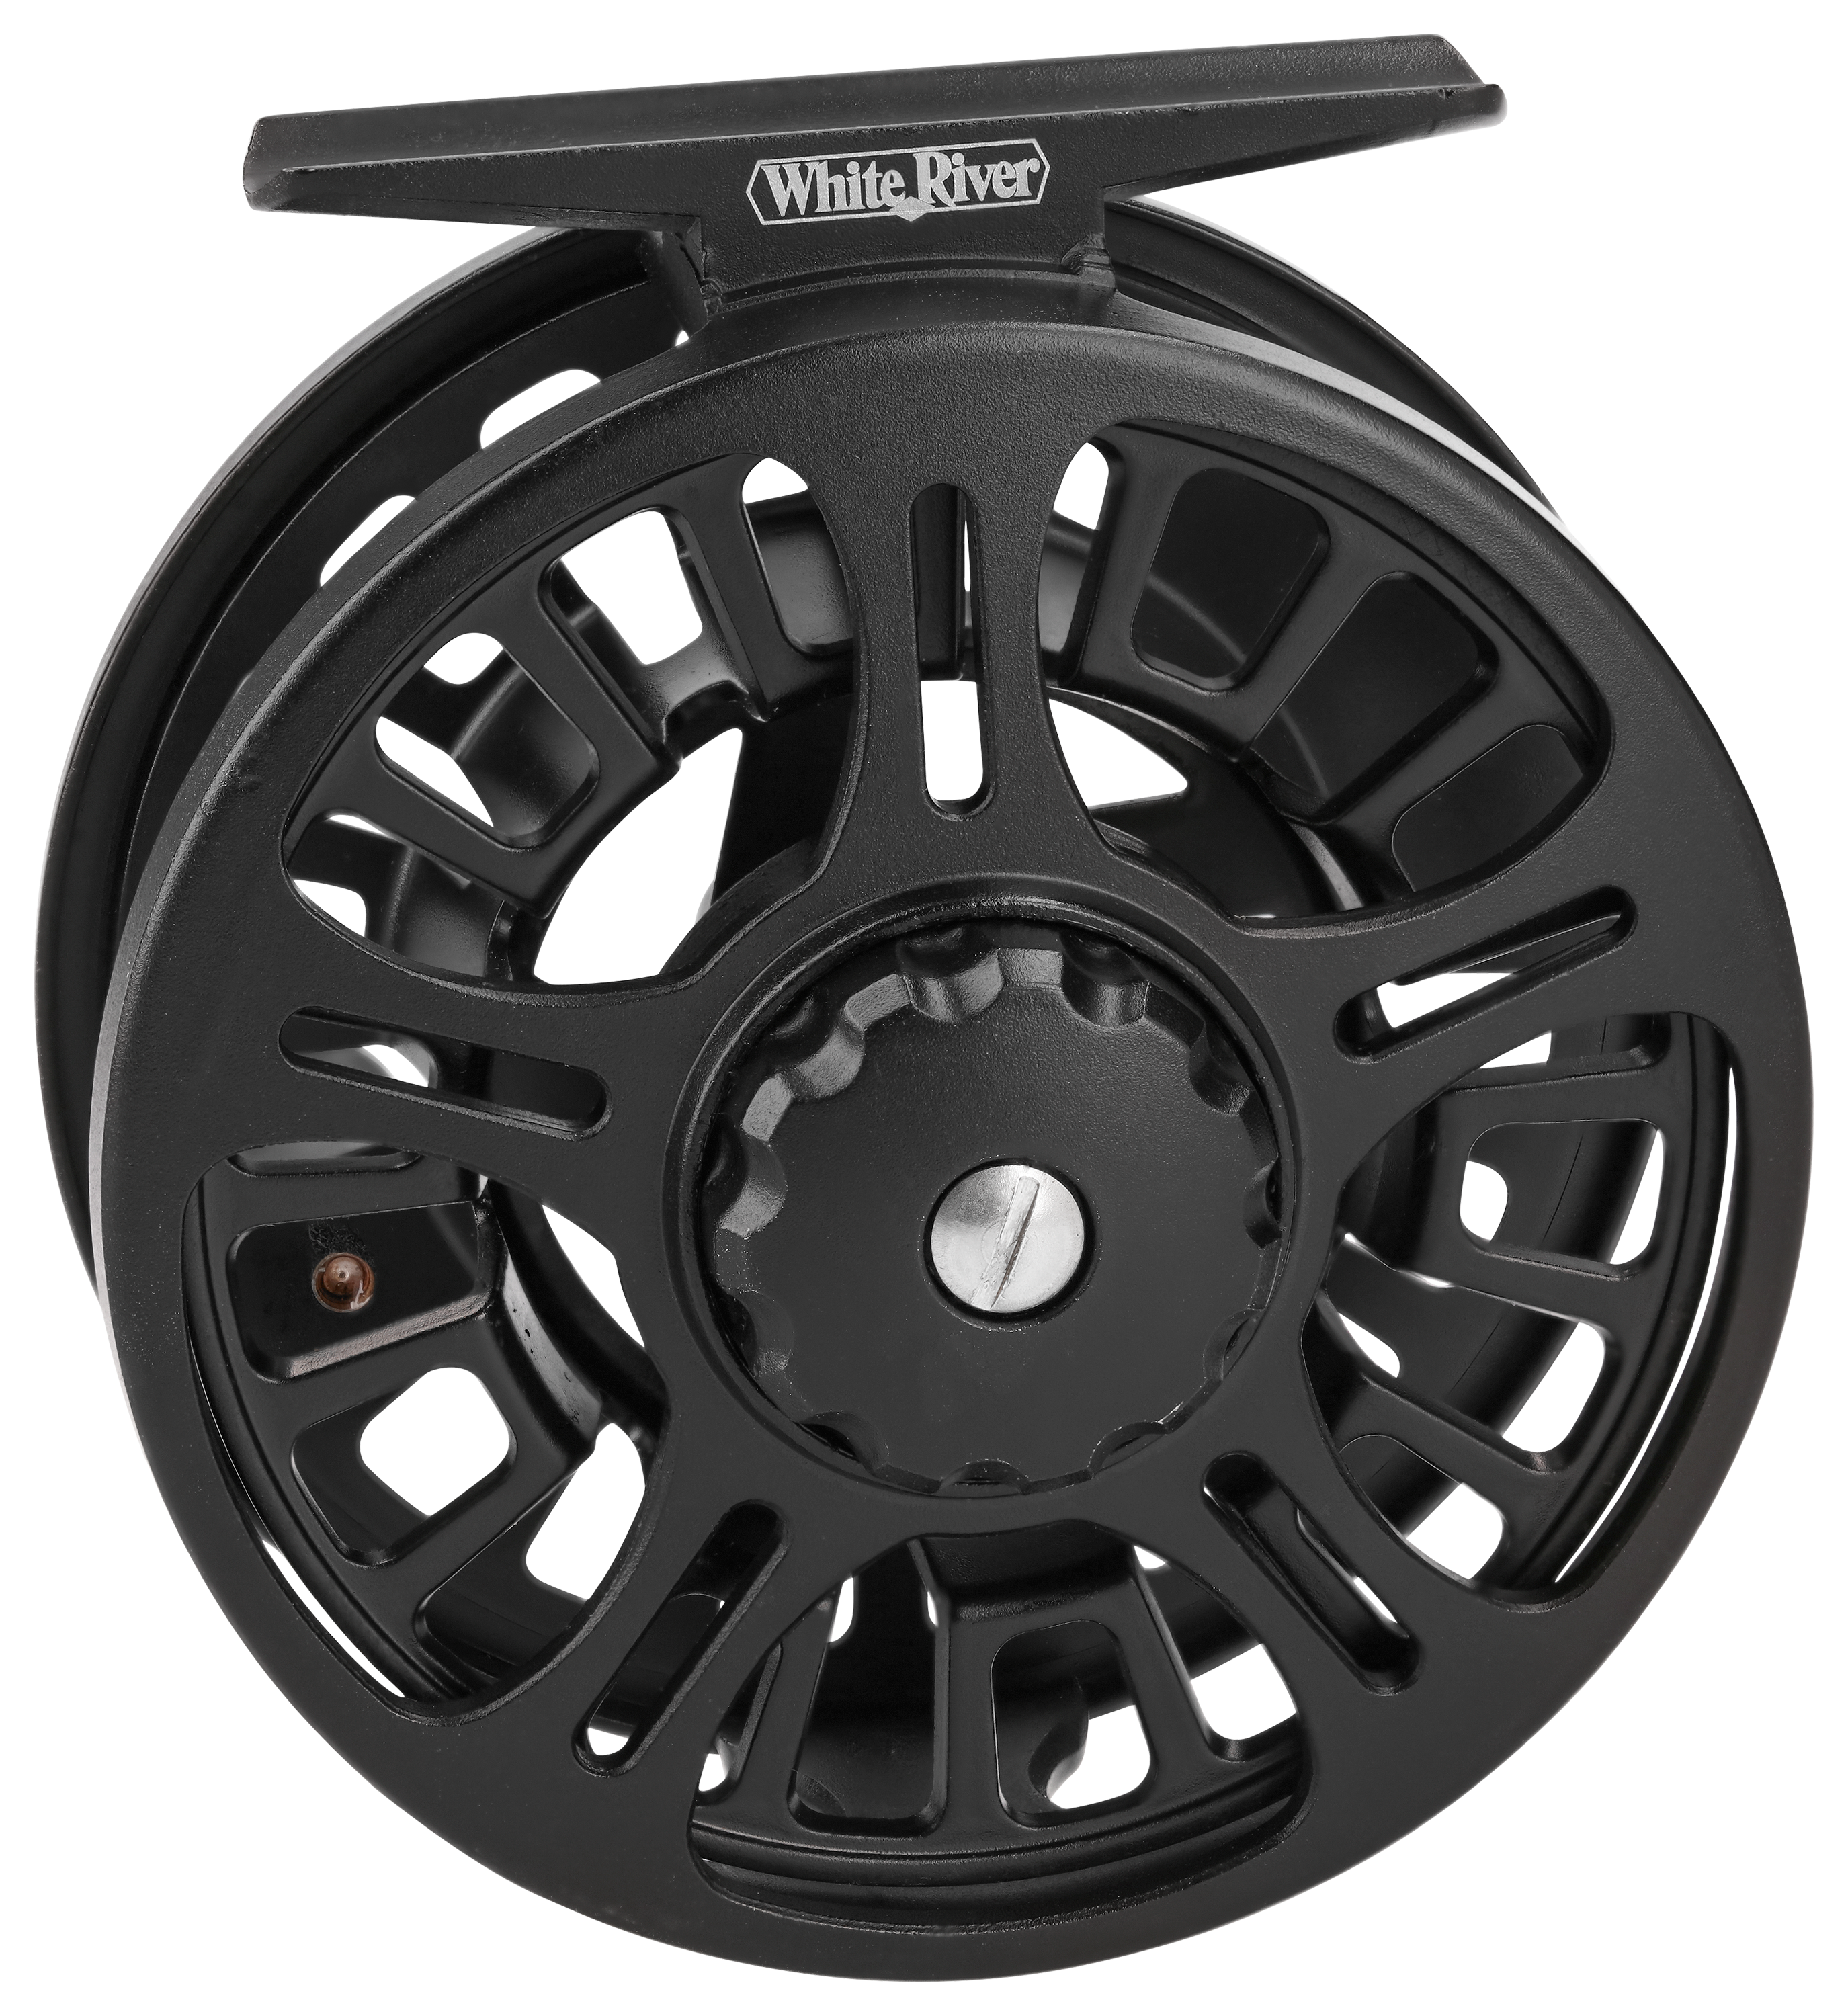 White River Fly Shop Dogwood Canyon Fly Reel - DGW34